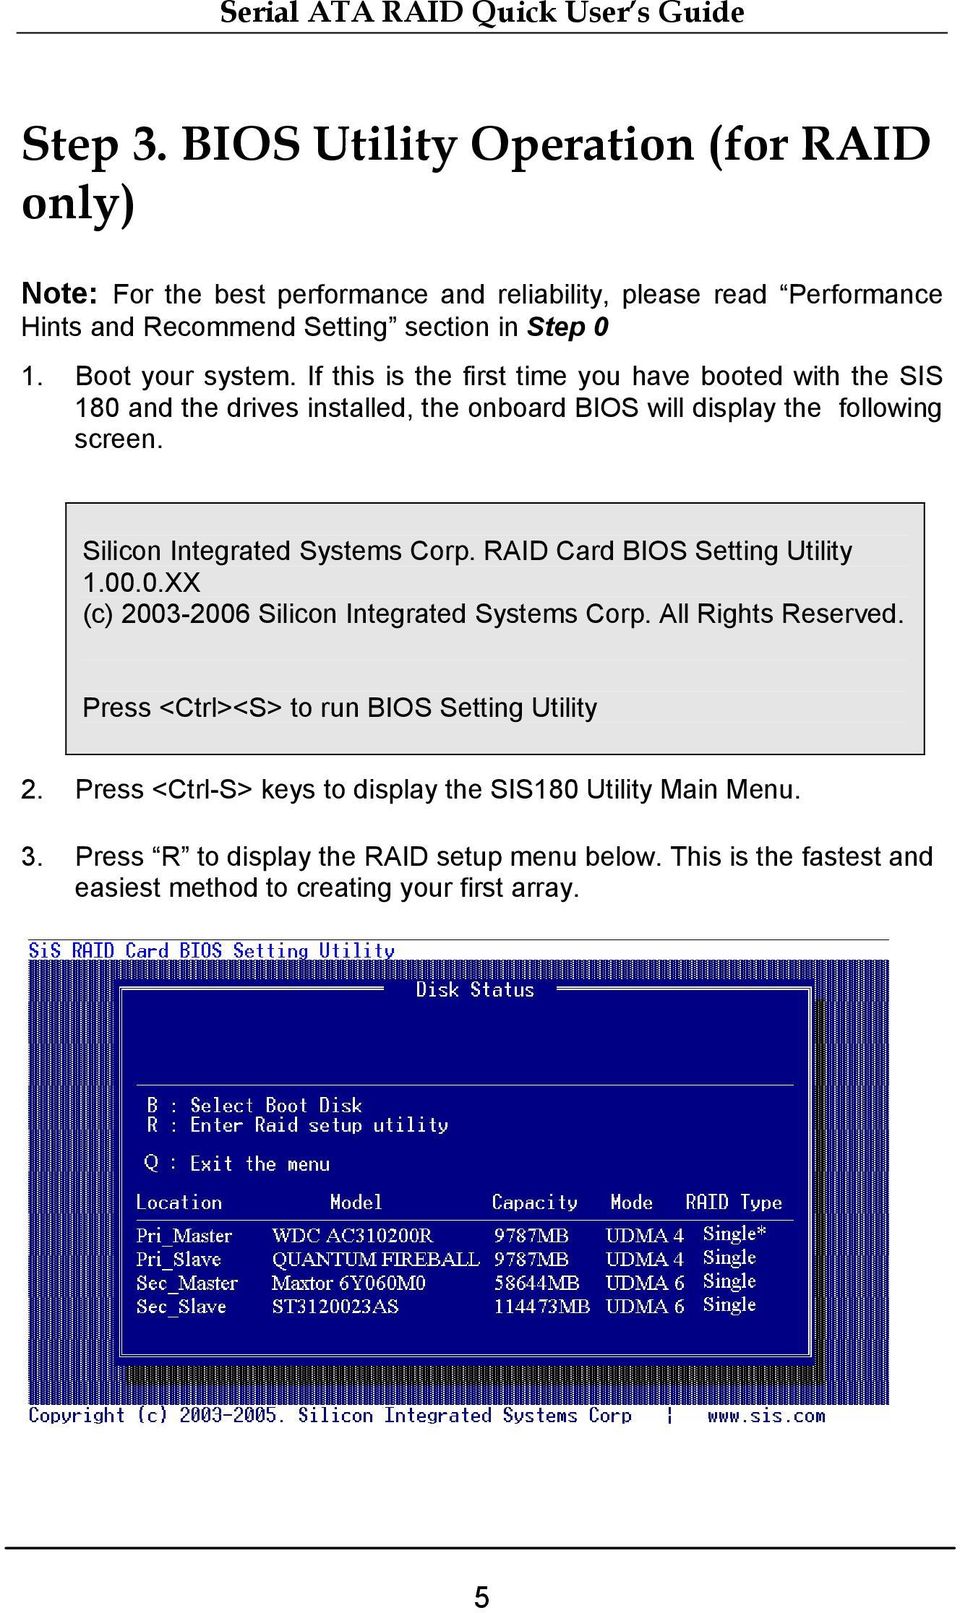 Silicon Integrated Systems Corp. RAID Card BIOS Setting Utility 1.00.0.XX (c) 2003-2006 Silicon Integrated Systems Corp. All Rights Reserved.